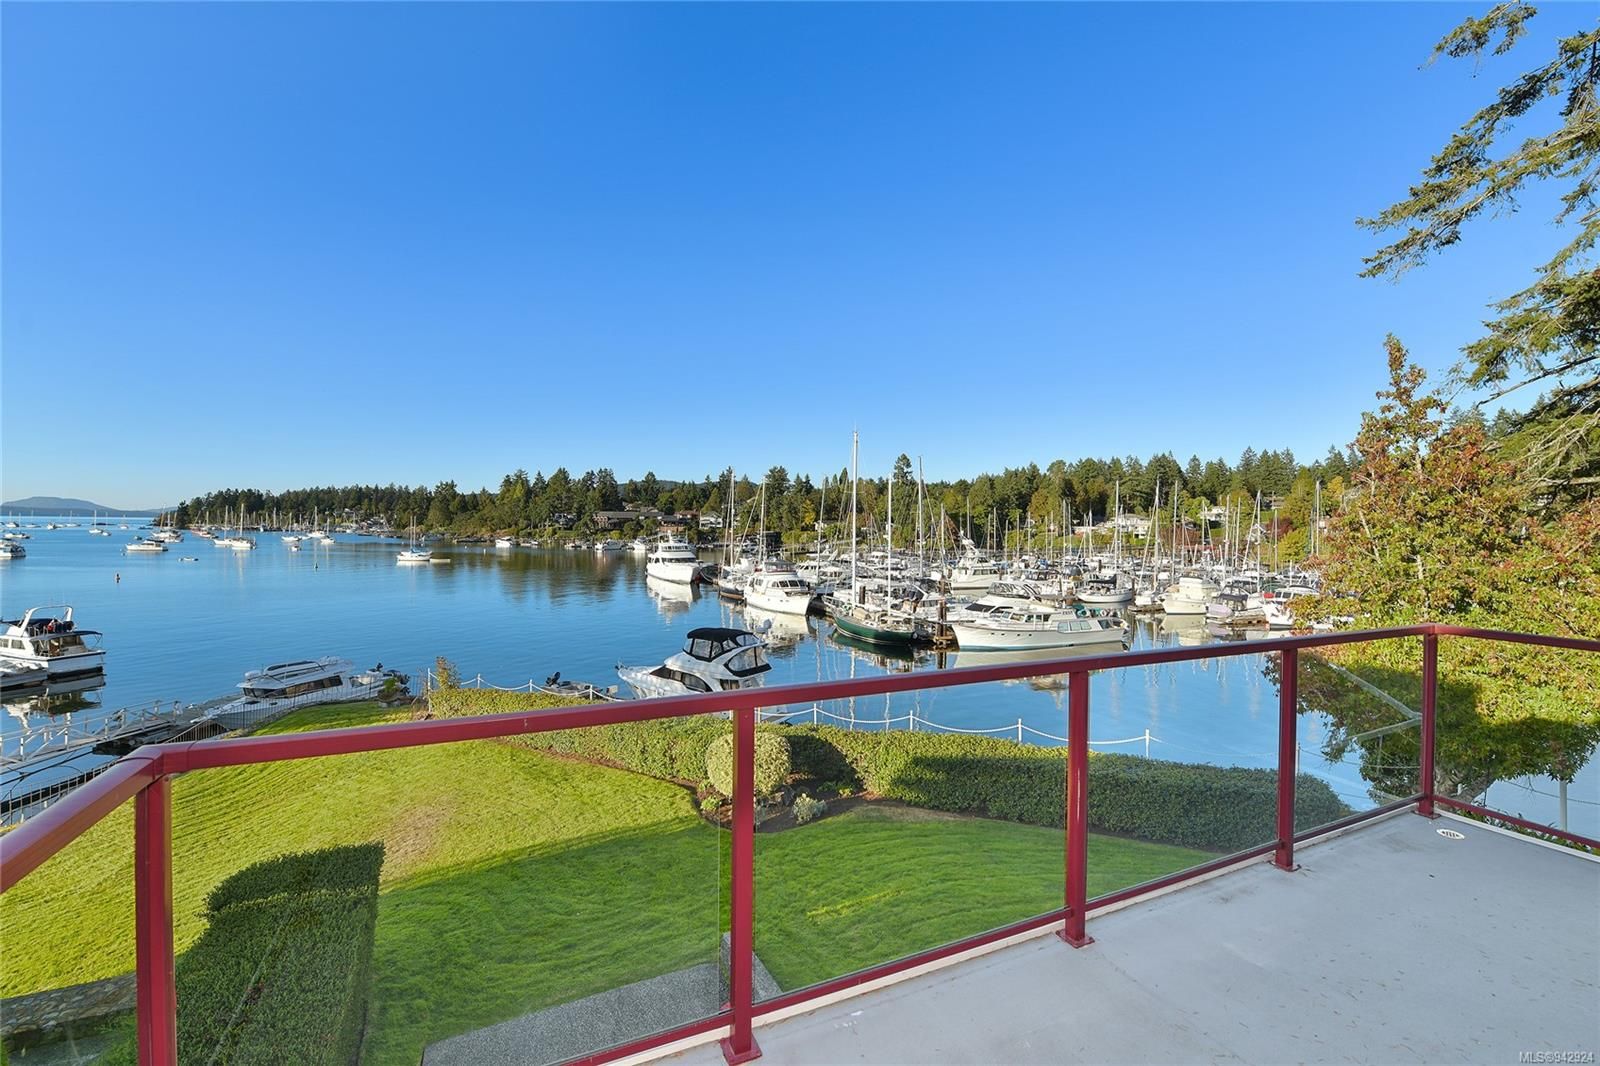 I have sold a property at 824 Delamere Rd in Central Saanich
